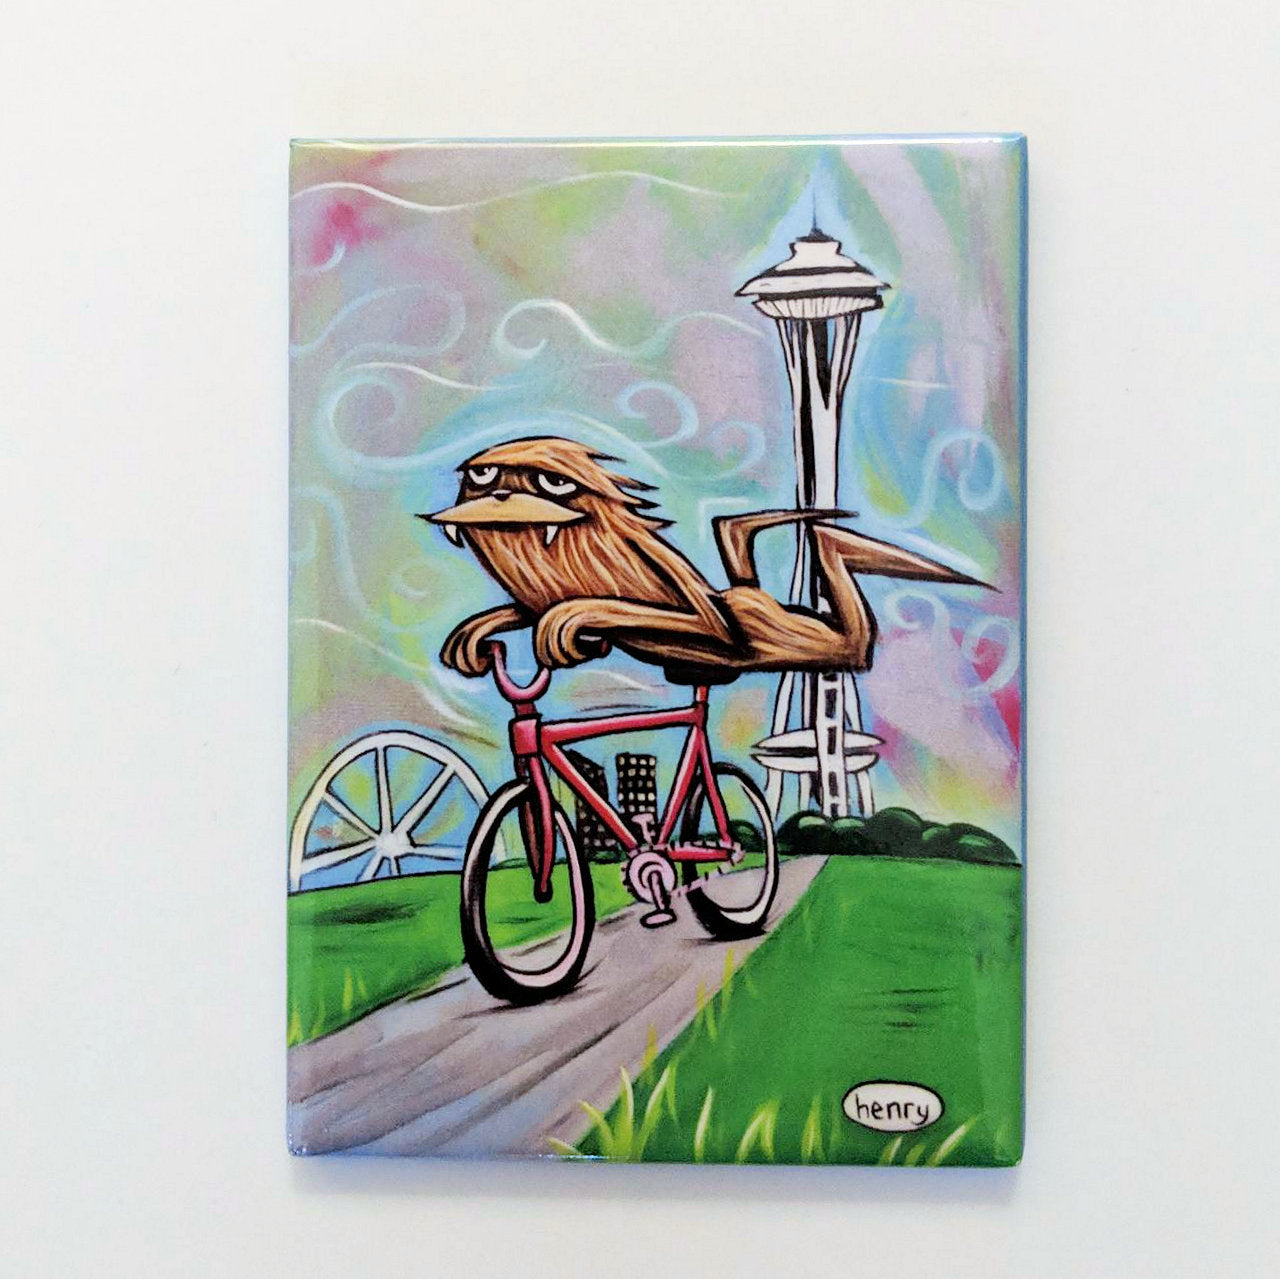 Sasquatch Riding a Bike in Seattle Magnet - Art of Henry